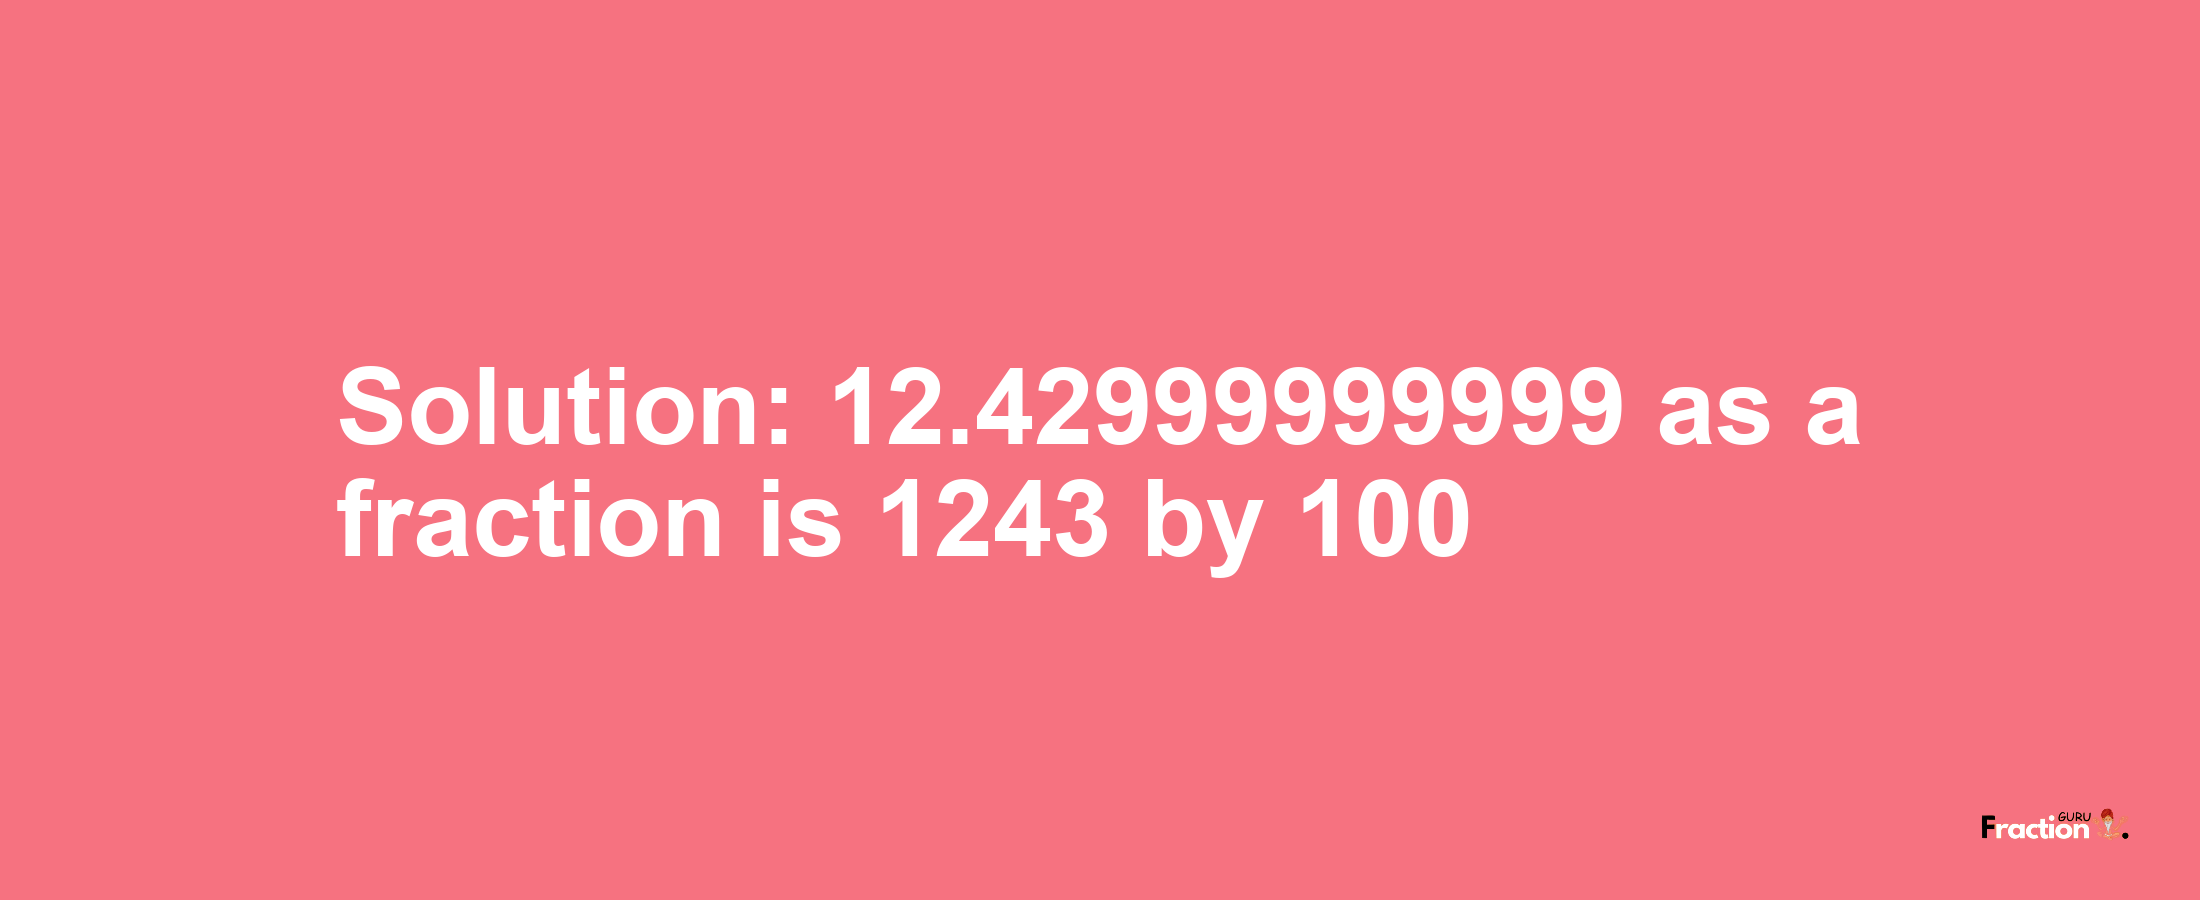 Solution:12.42999999999 as a fraction is 1243/100